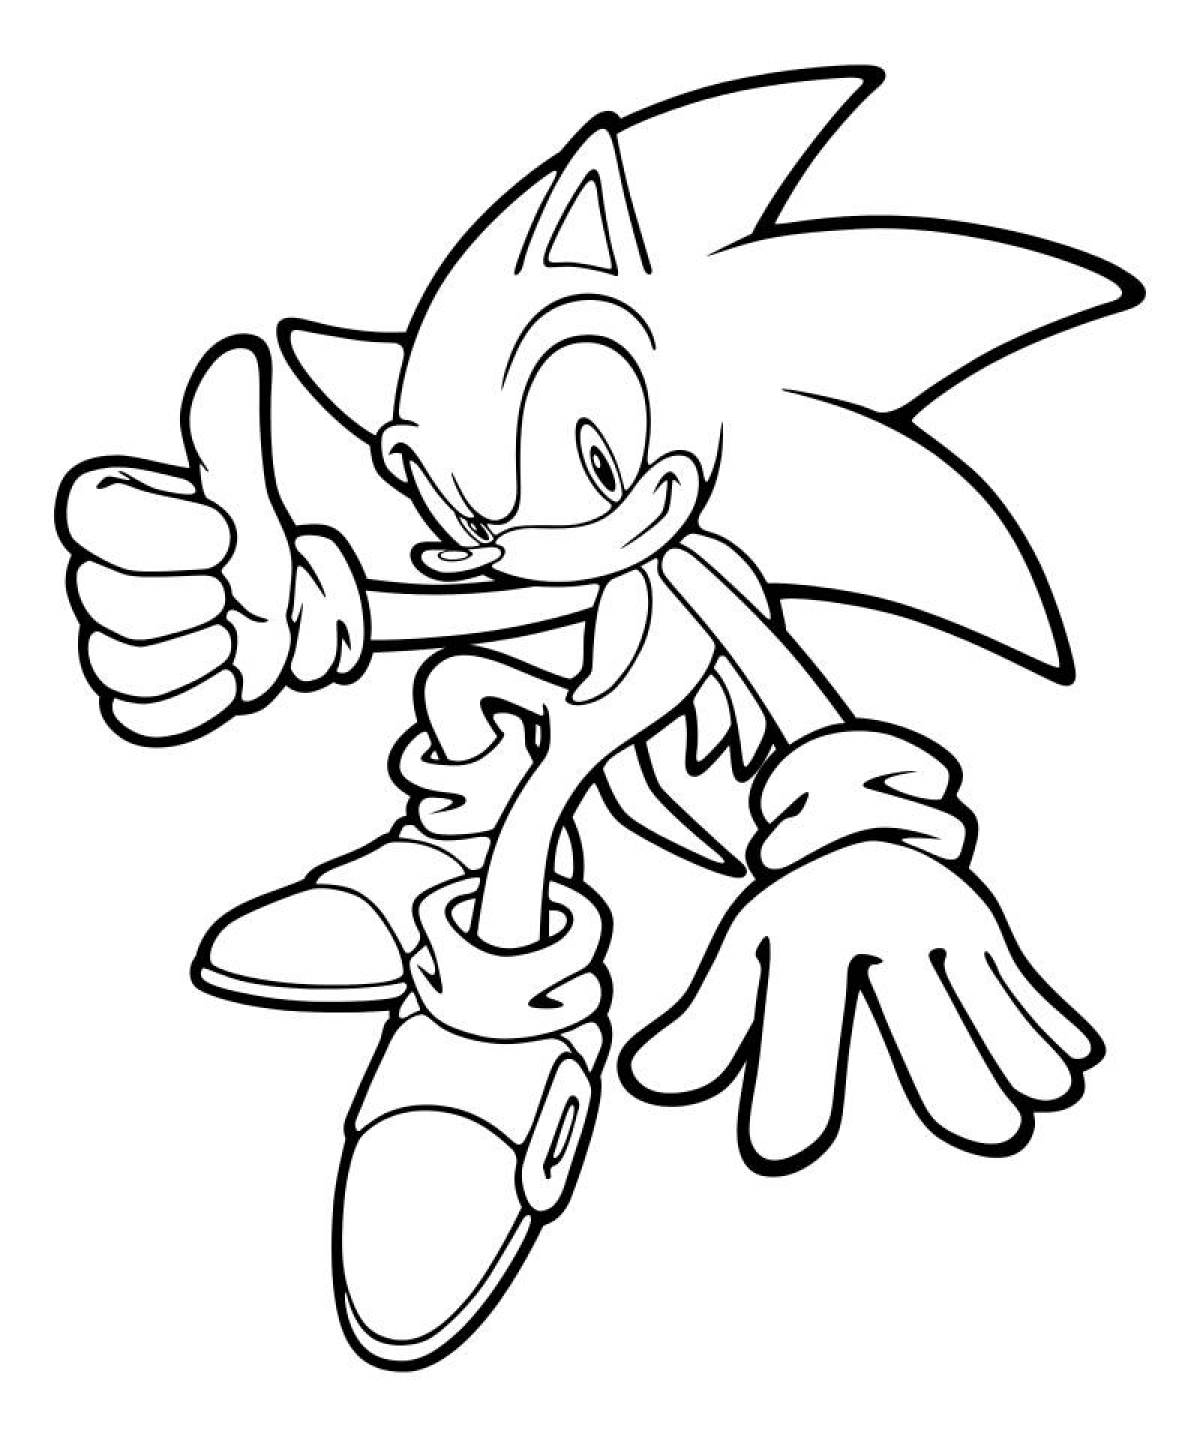 Sonic bright coloring for kids